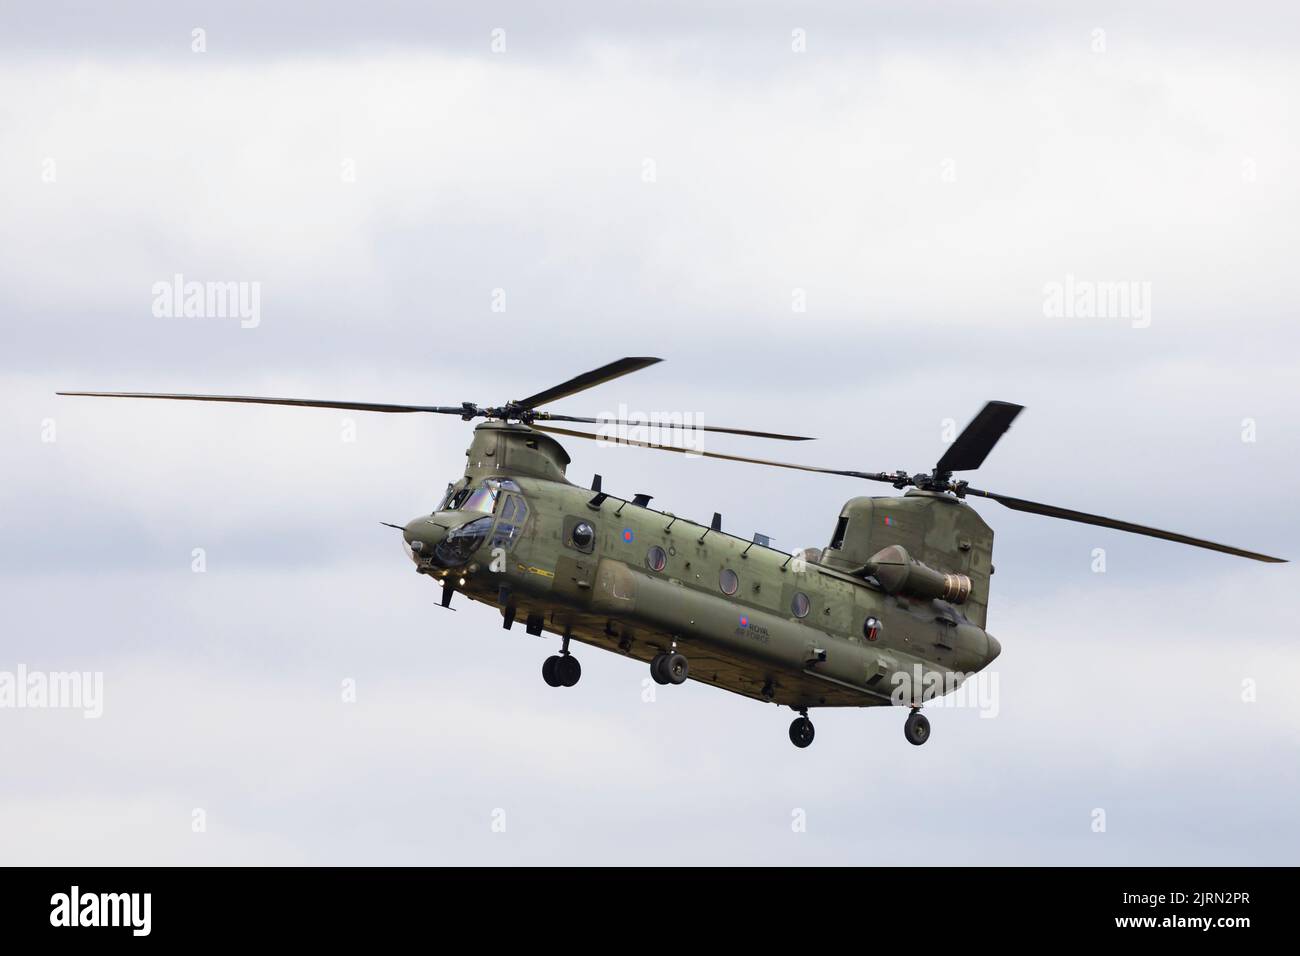 Boeing CH-47D Chinook heavy lift of the Royal Air Force Chinook Display Team, based at RAF Odiham, RAF Syerston families day. Stock Photo